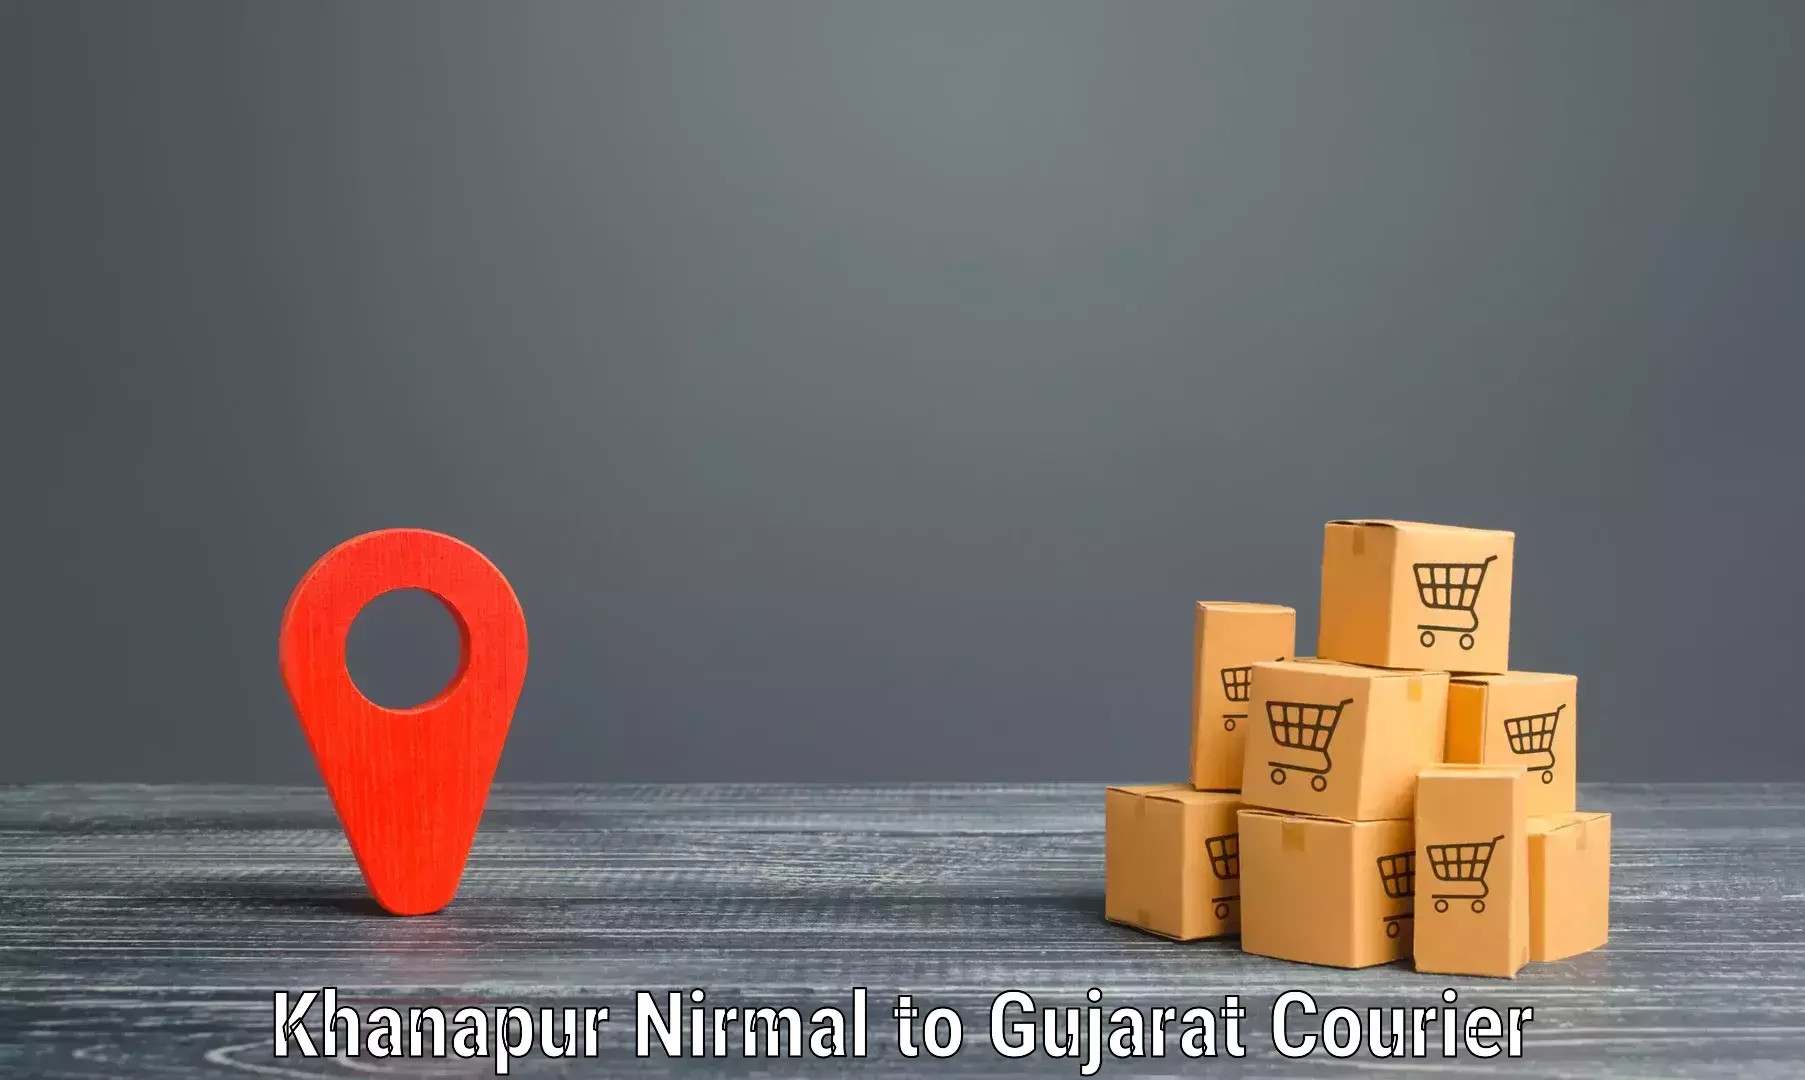 Multi-national courier services in Khanapur Nirmal to Gujarat